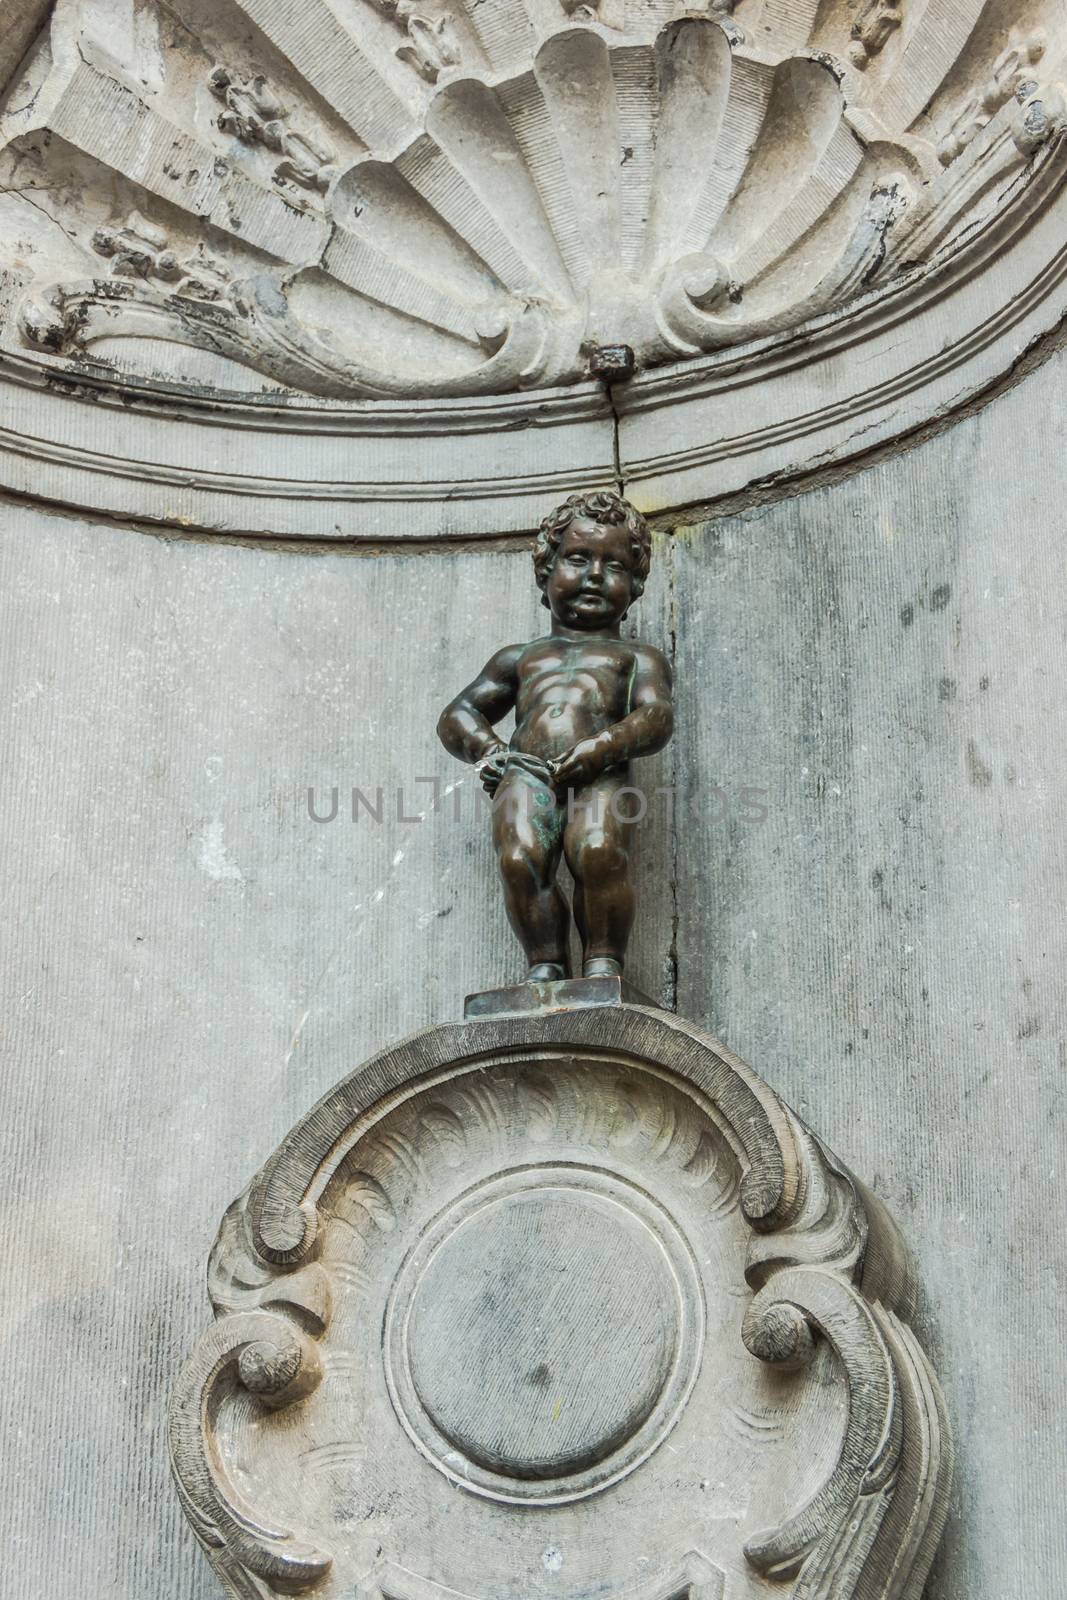 Manneken Pis (Peeing Boy), famous symbol of the city, on May 02, 2013. Due to repeated thefts only the copy is exposed, the original is kept at the King’s House on the Grand Place.